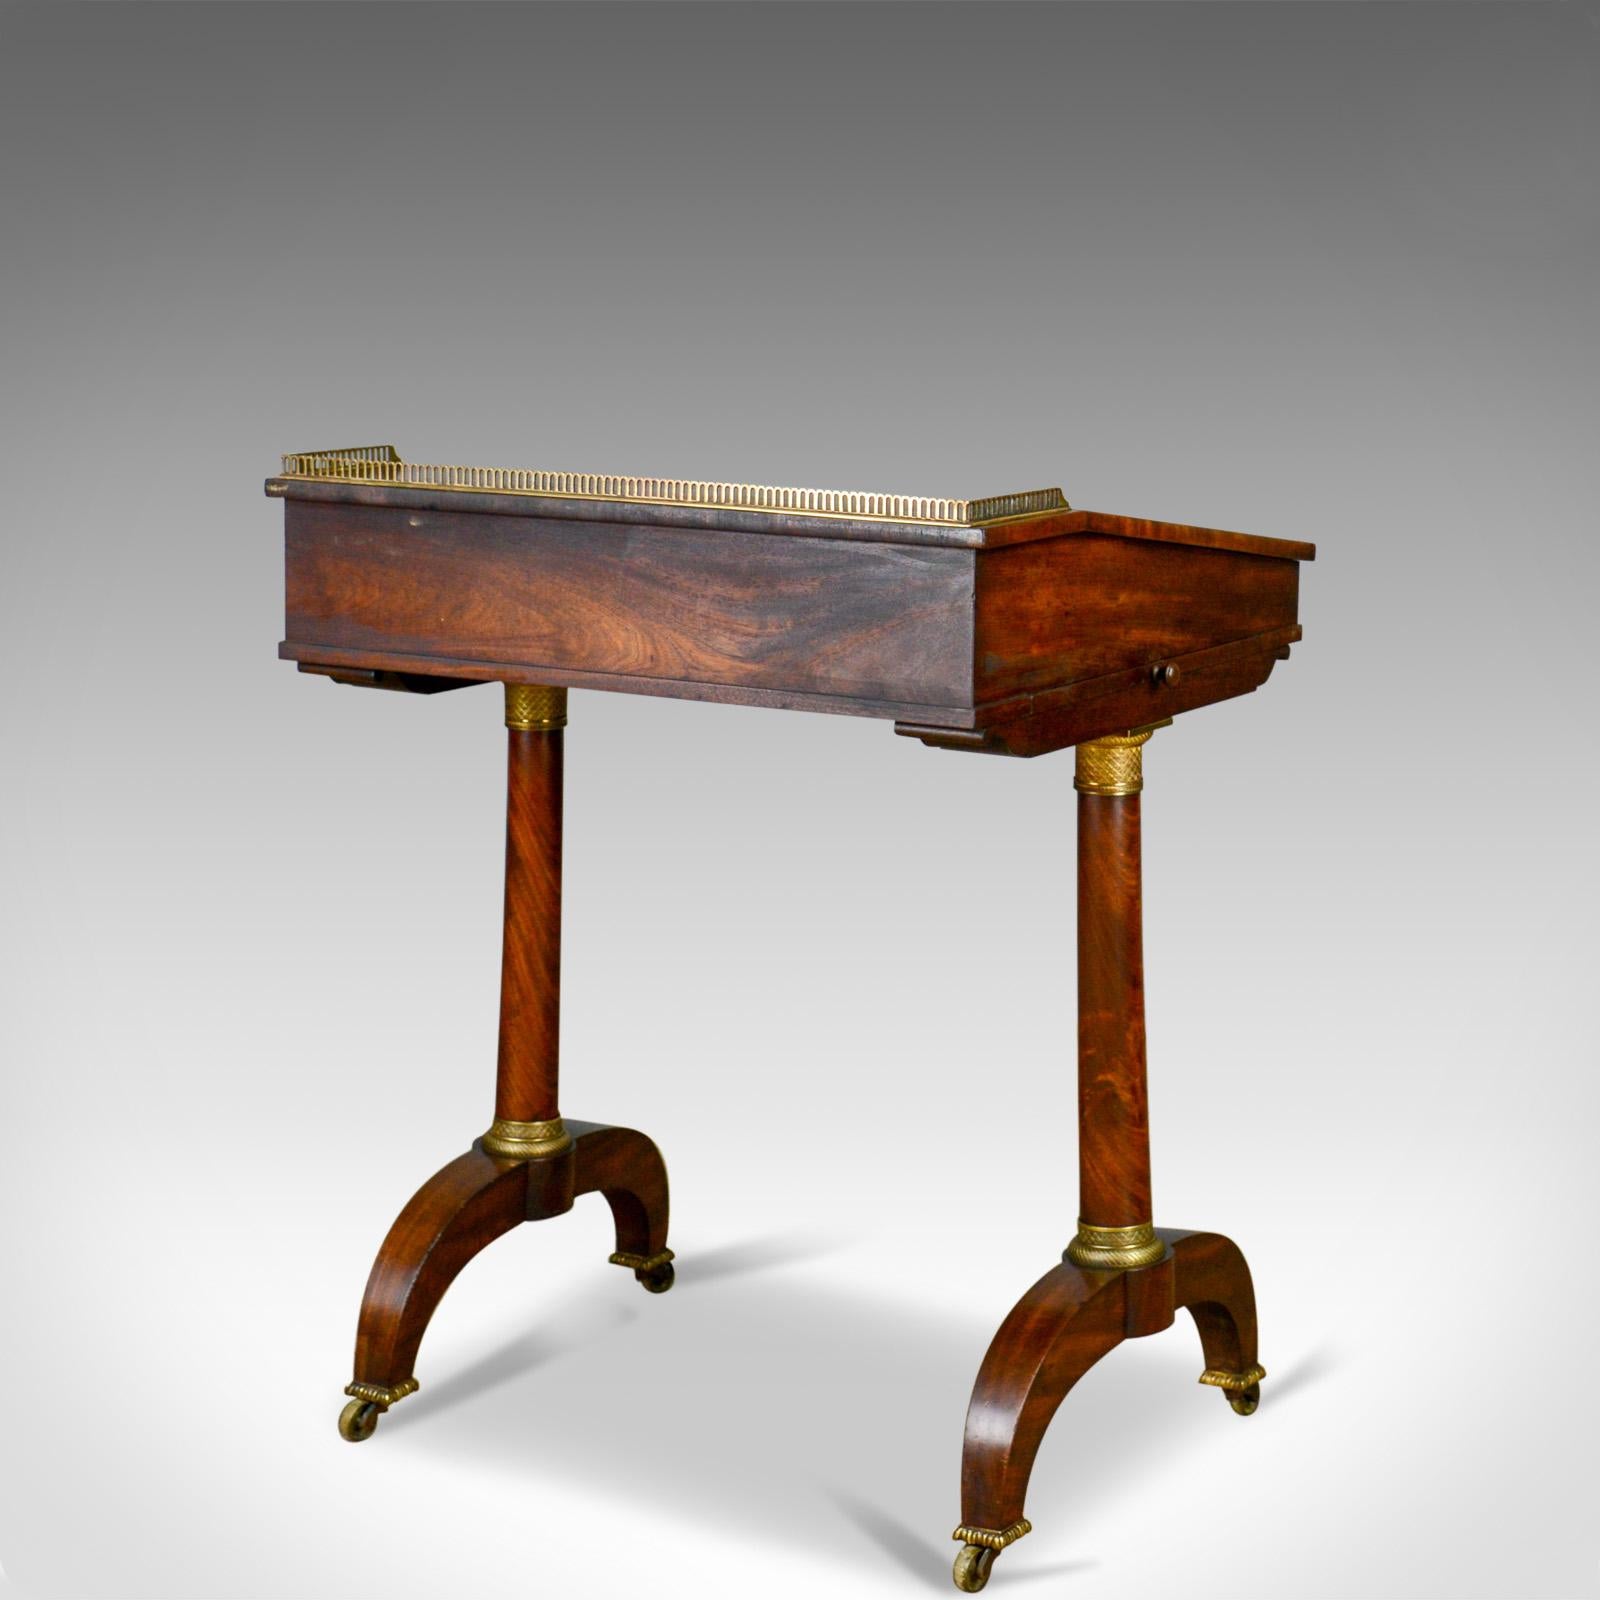 Antique Writing Table, English, Regency, Mahogany, Davenport, circa 1820 In Good Condition For Sale In Hele, Devon, GB